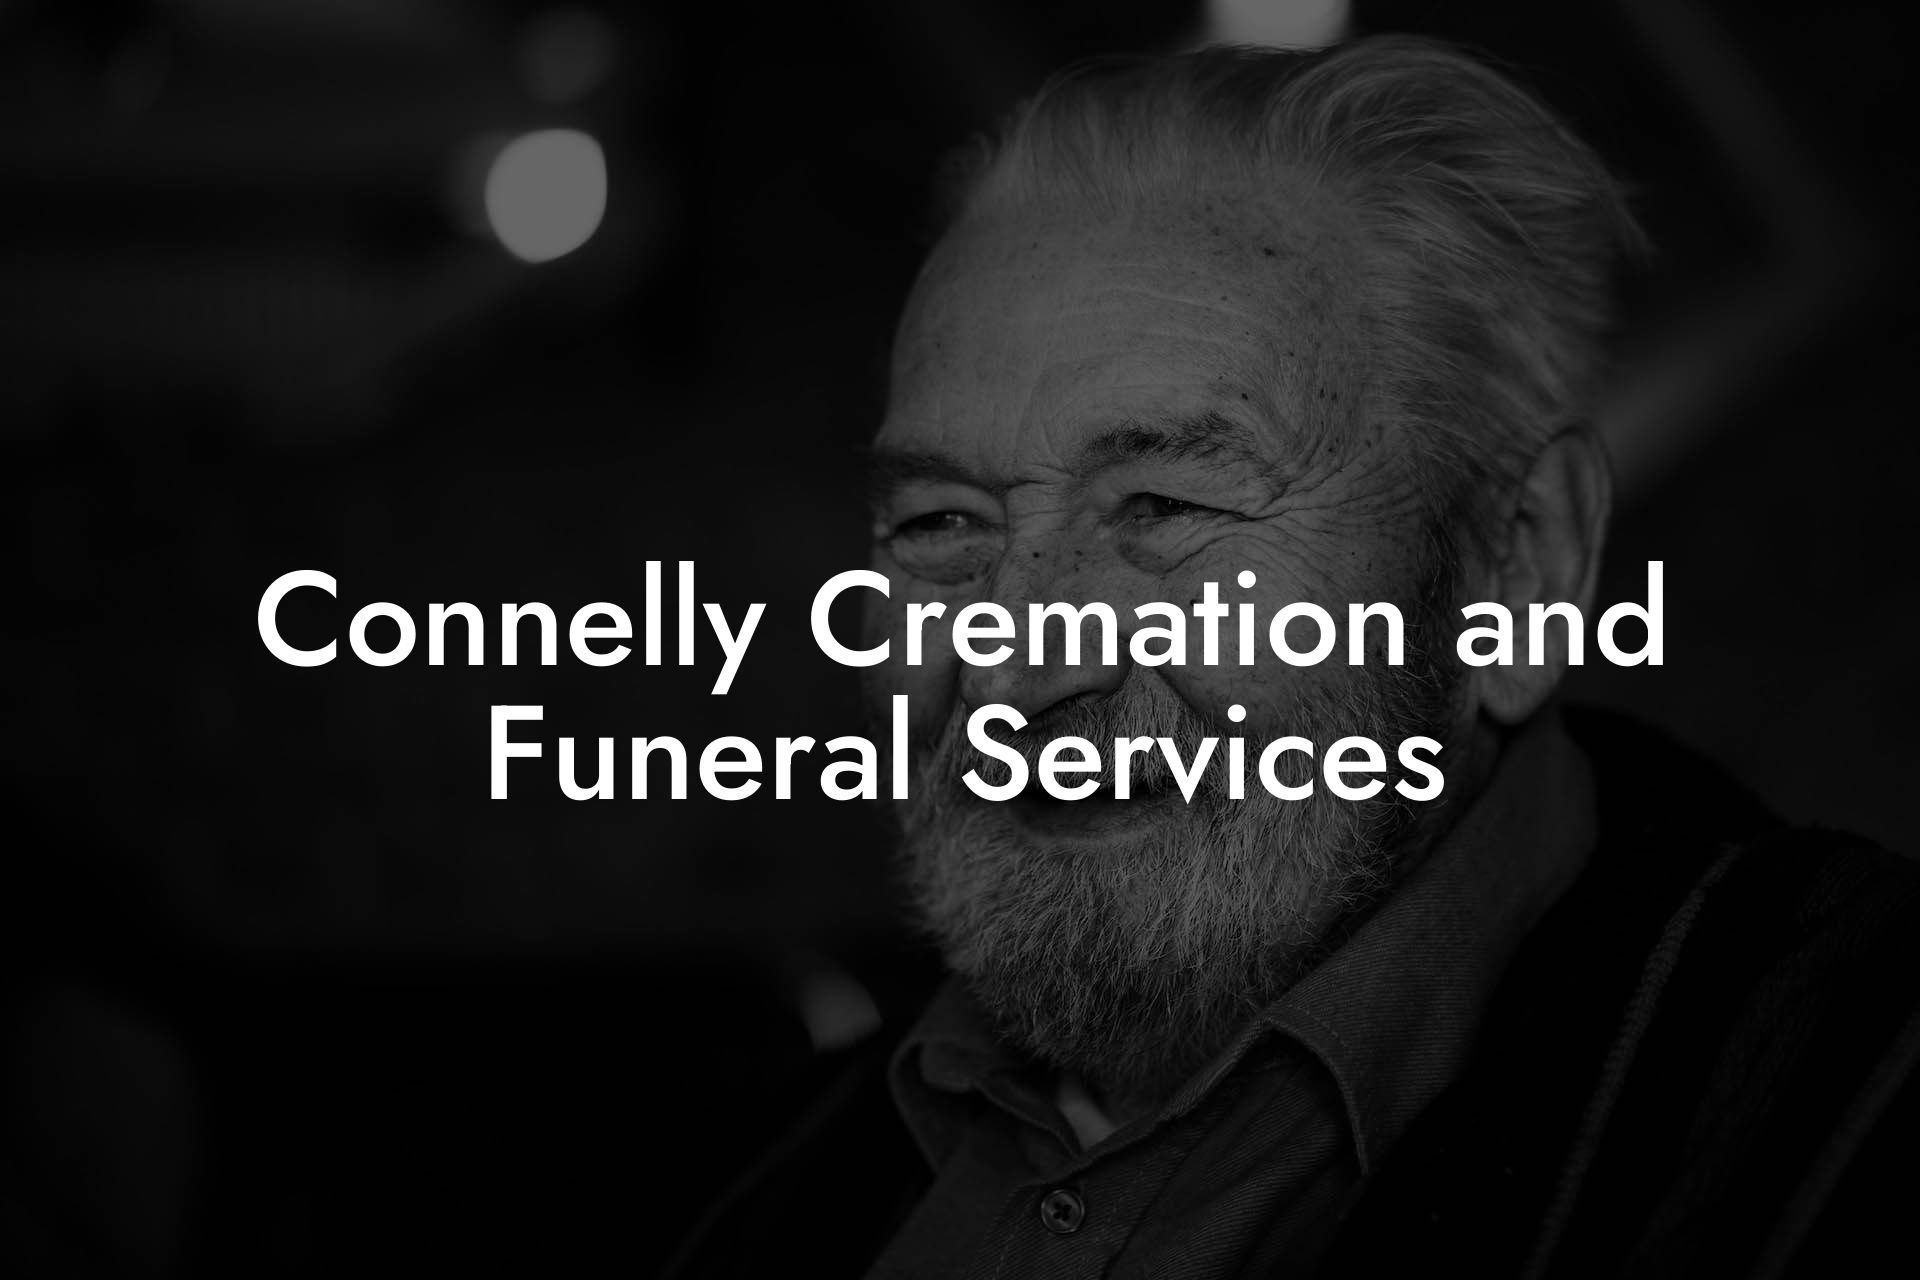 Connelly Cremation and Funeral Services